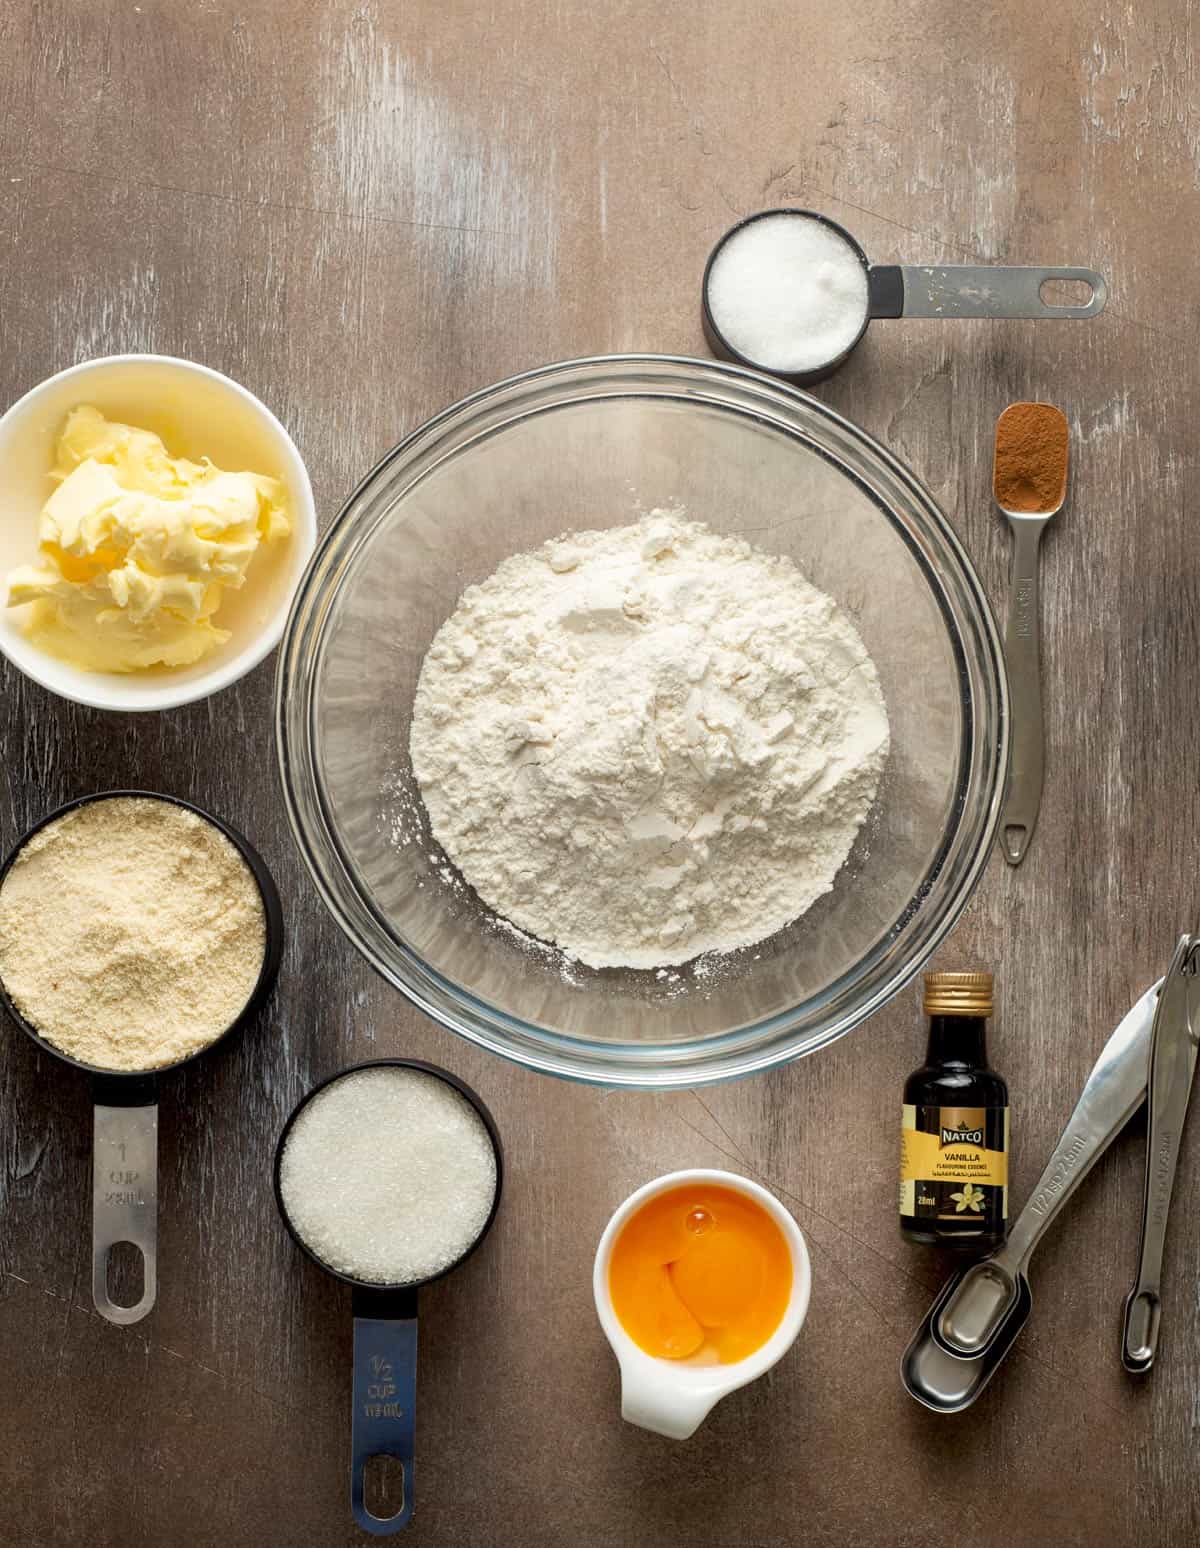 Ingredients needed: all-purpose flour, almond flour, granulated sugar, unsalted butter, egg yolks, vanilla extract and cinnamon.